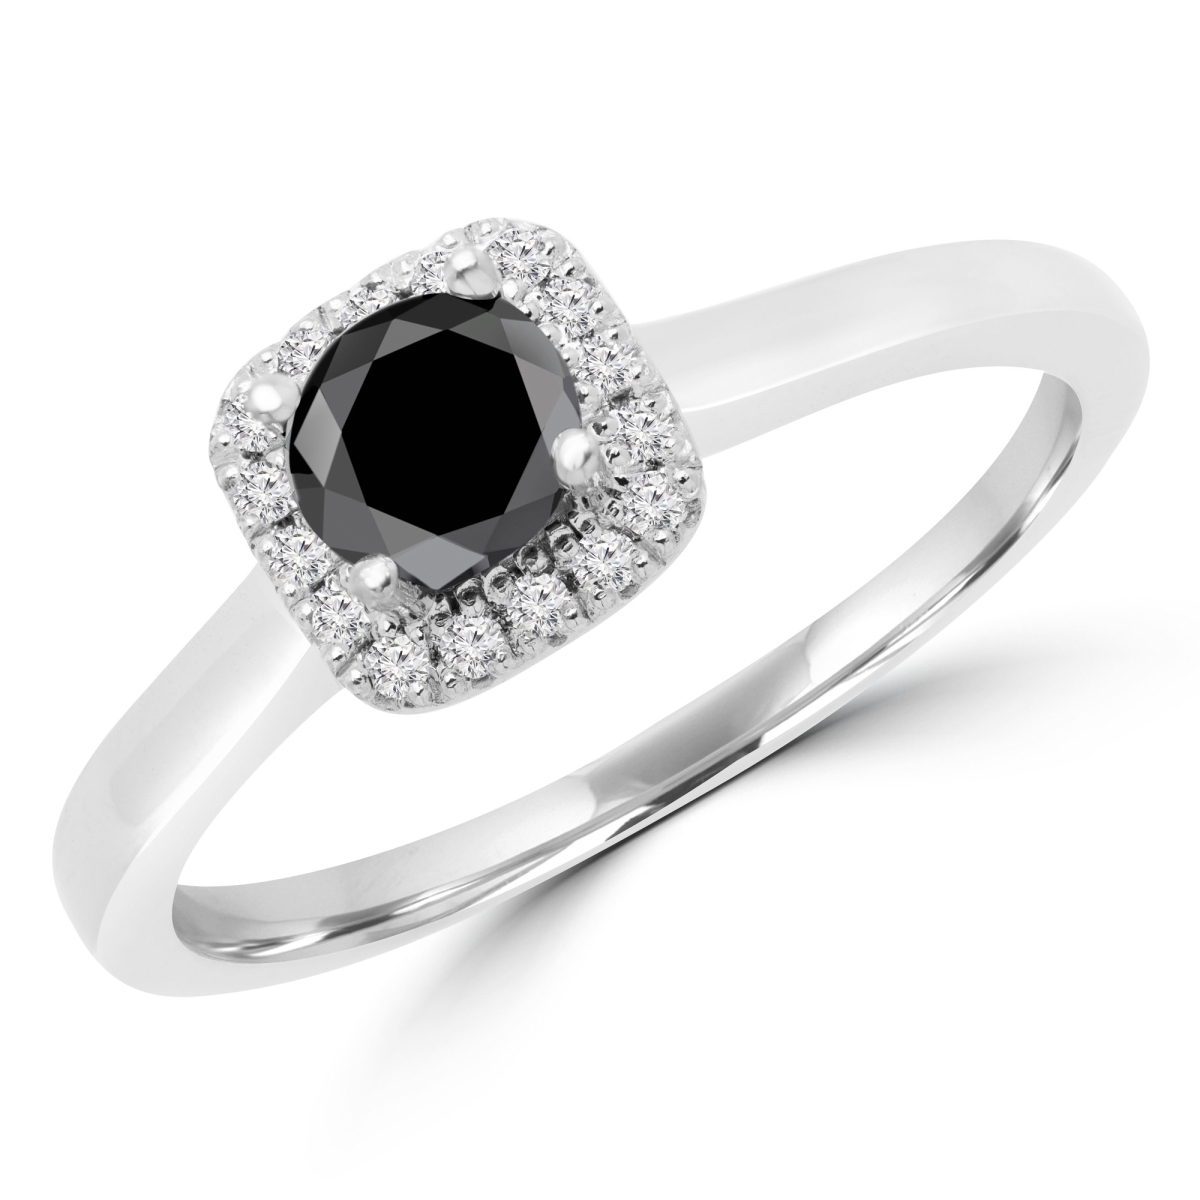 Picture of Majesty Diamonds MD170112 0.5 CTW Round BlacK Diamond Halo Engagement Ring in 14K